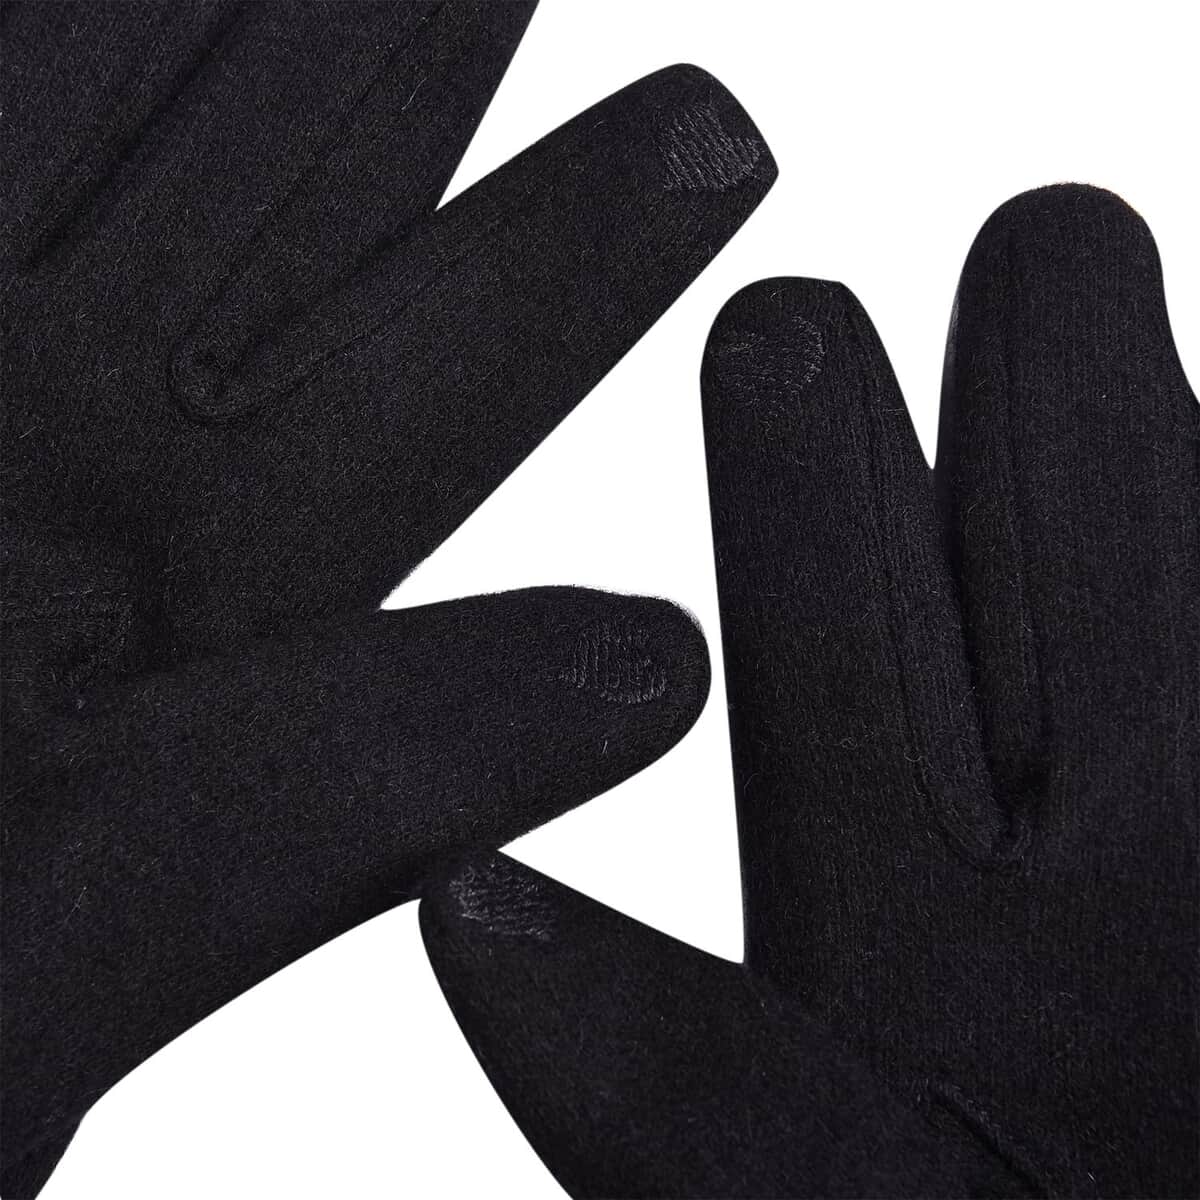 Black Cashmere Warm Gloves with Bowknot and Equipped Touch Screen Friendly (9.05"x3.54") image number 5